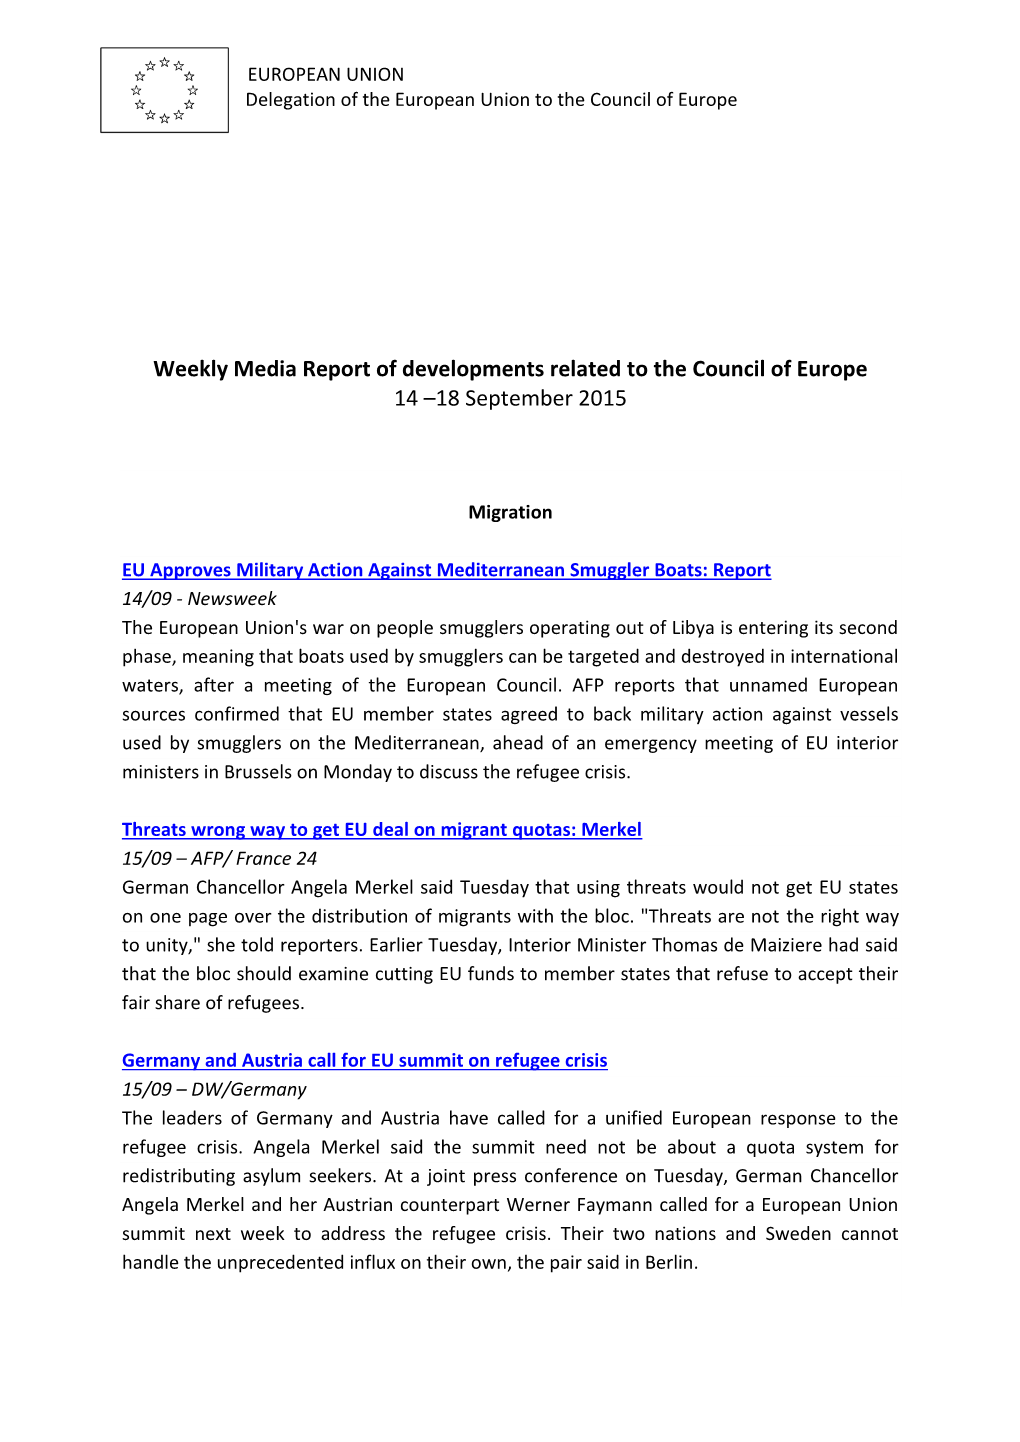 Weekly Media Report of Developments Related to the Council of Europe 14 –18 September 2015